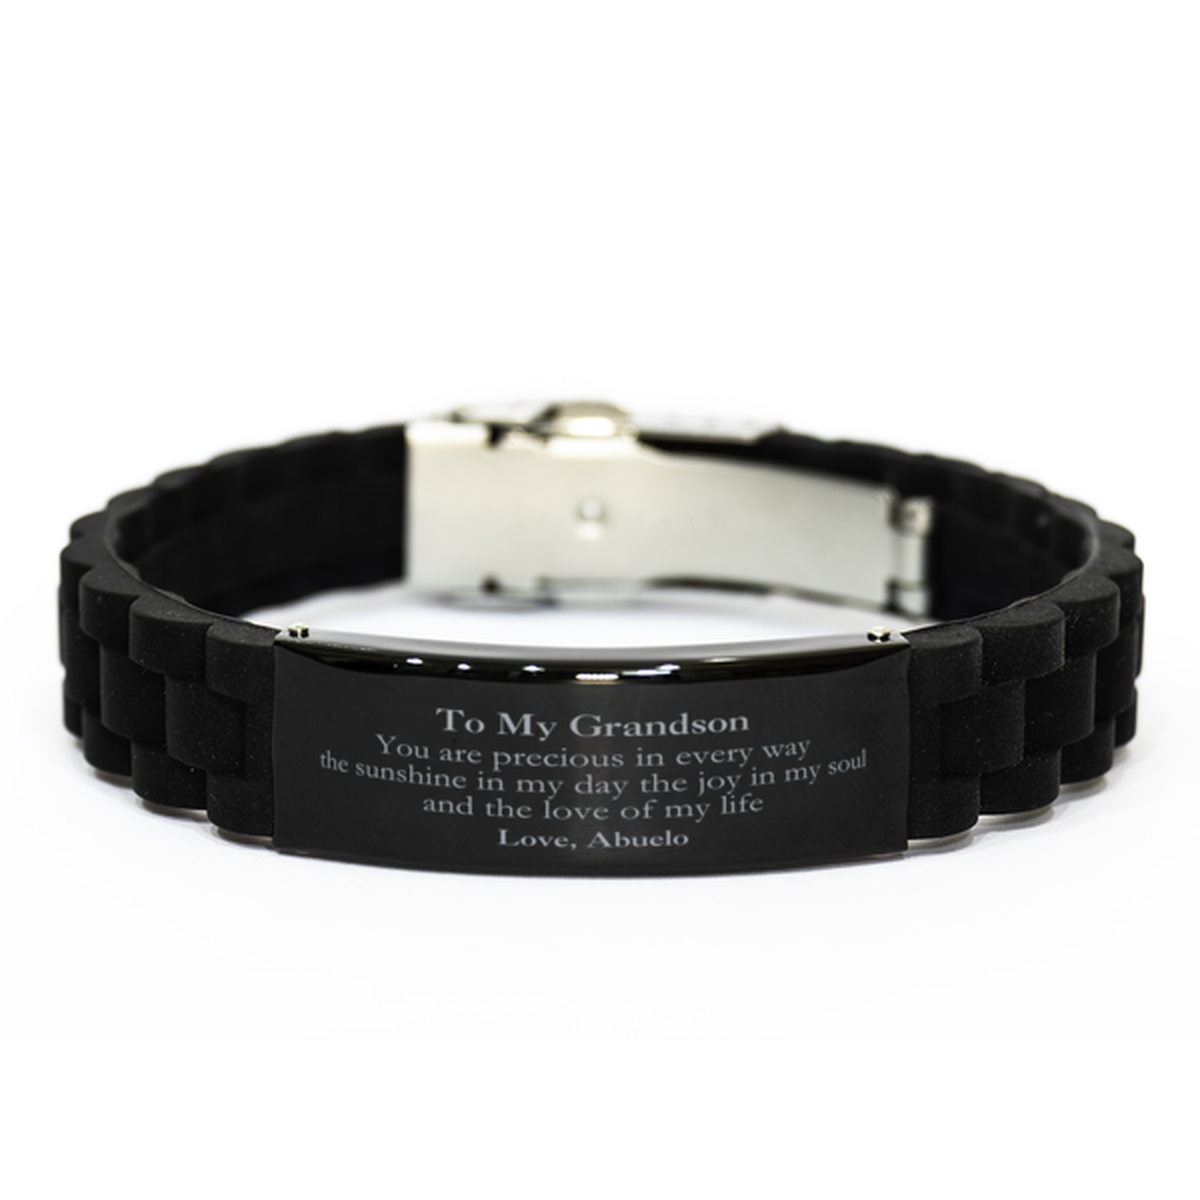 Graduation Gifts for Grandson Black Glidelock Clasp Bracelet Present from Abuelo, Christmas Grandson Birthday Gifts Grandson You are precious in every way the sunshine in my day. Love, Abuelo